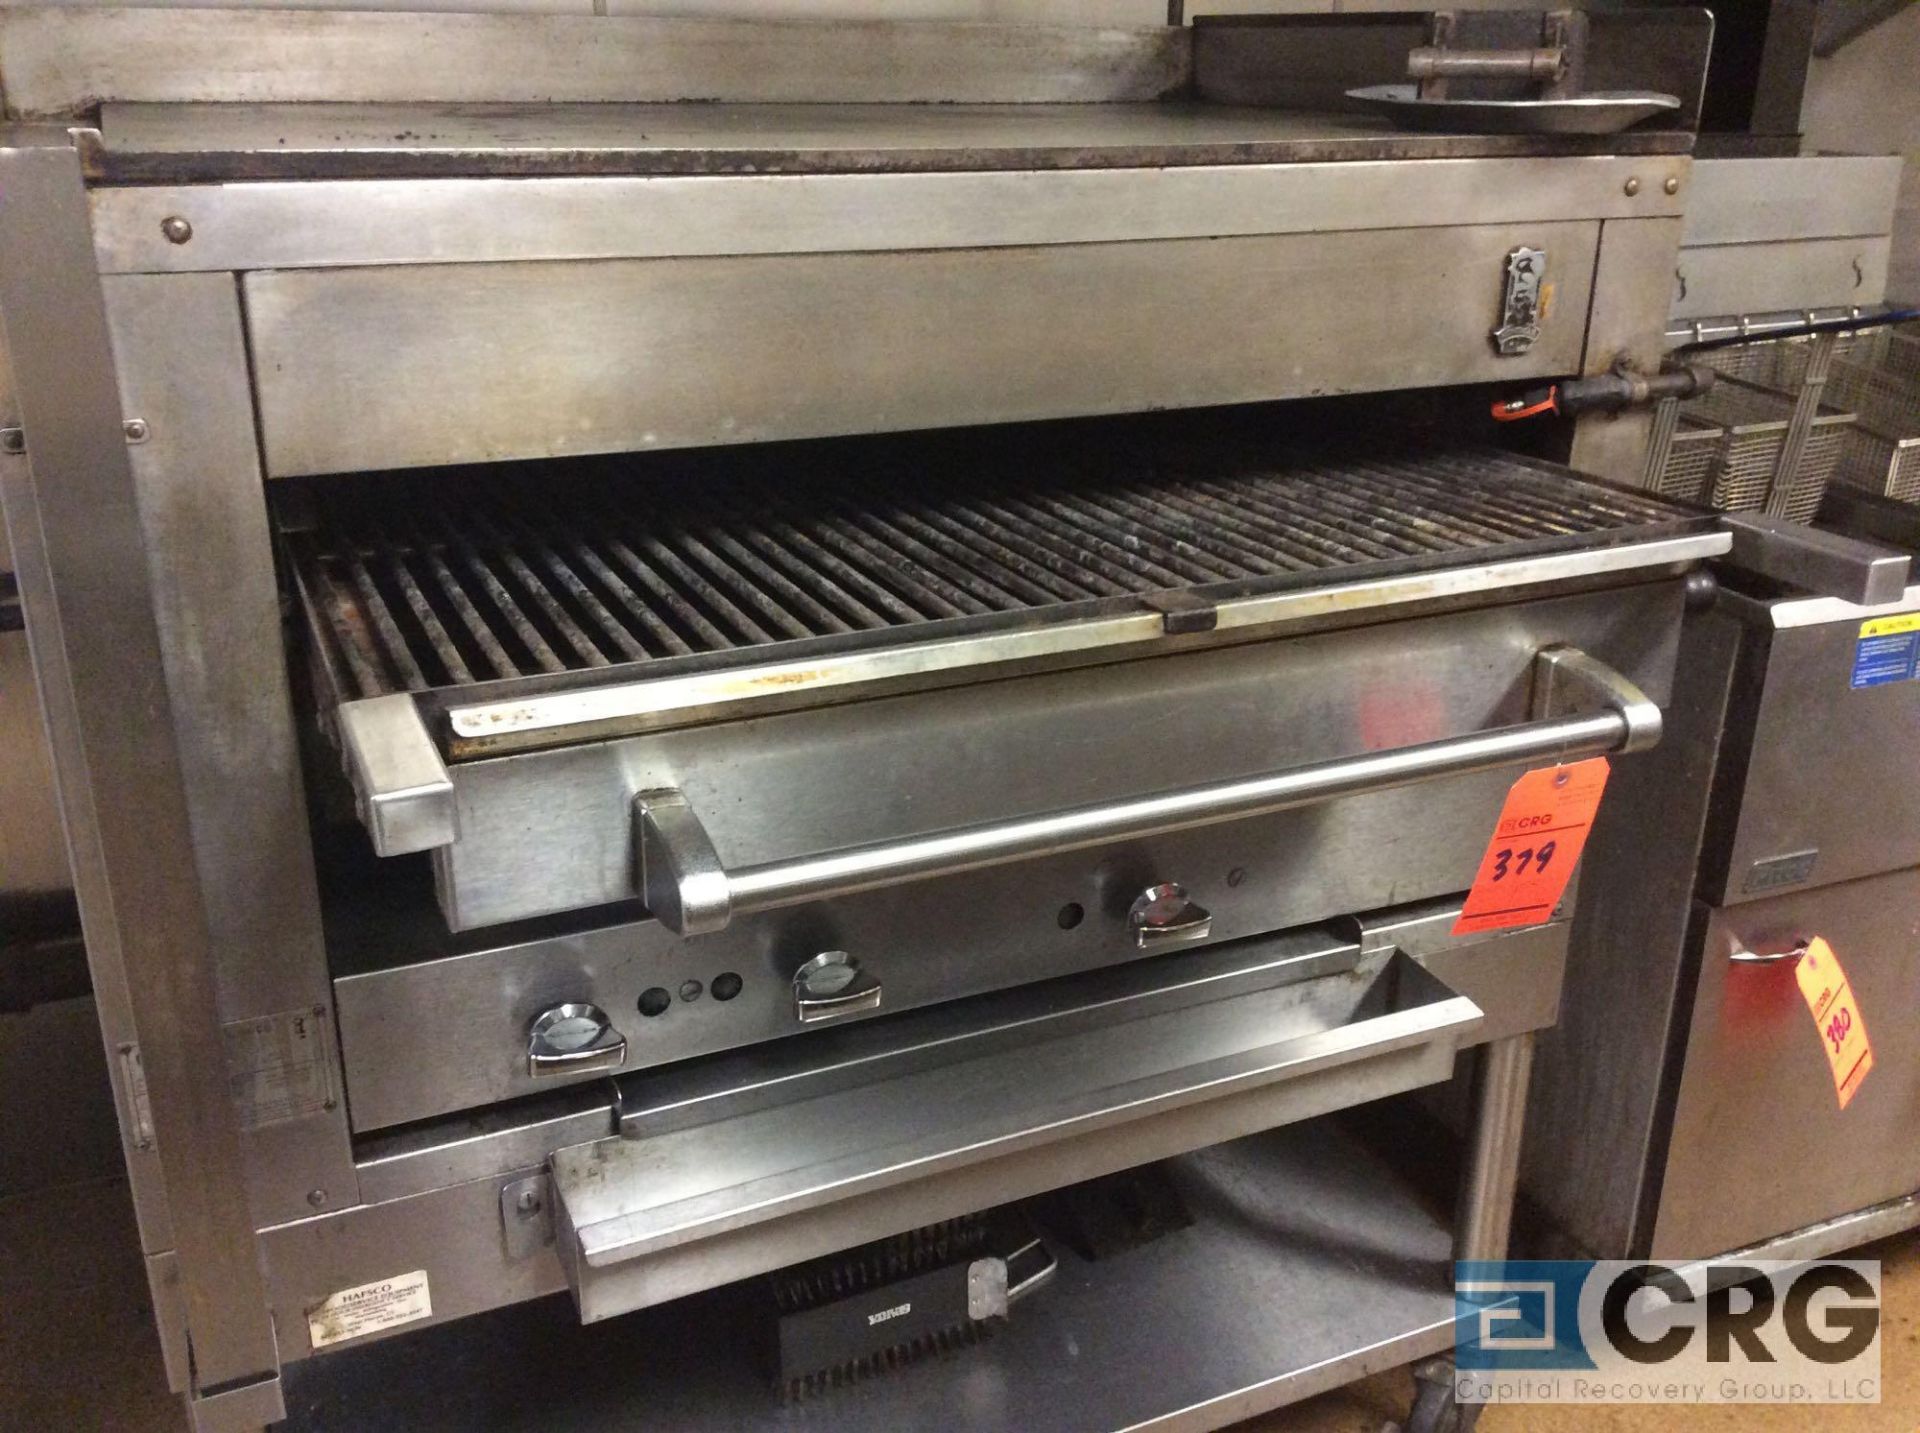 Montague C45-SHB portable stainless steel 36 inch portable charbroiler / grill, GAS, (buyer needs to - Image 2 of 6